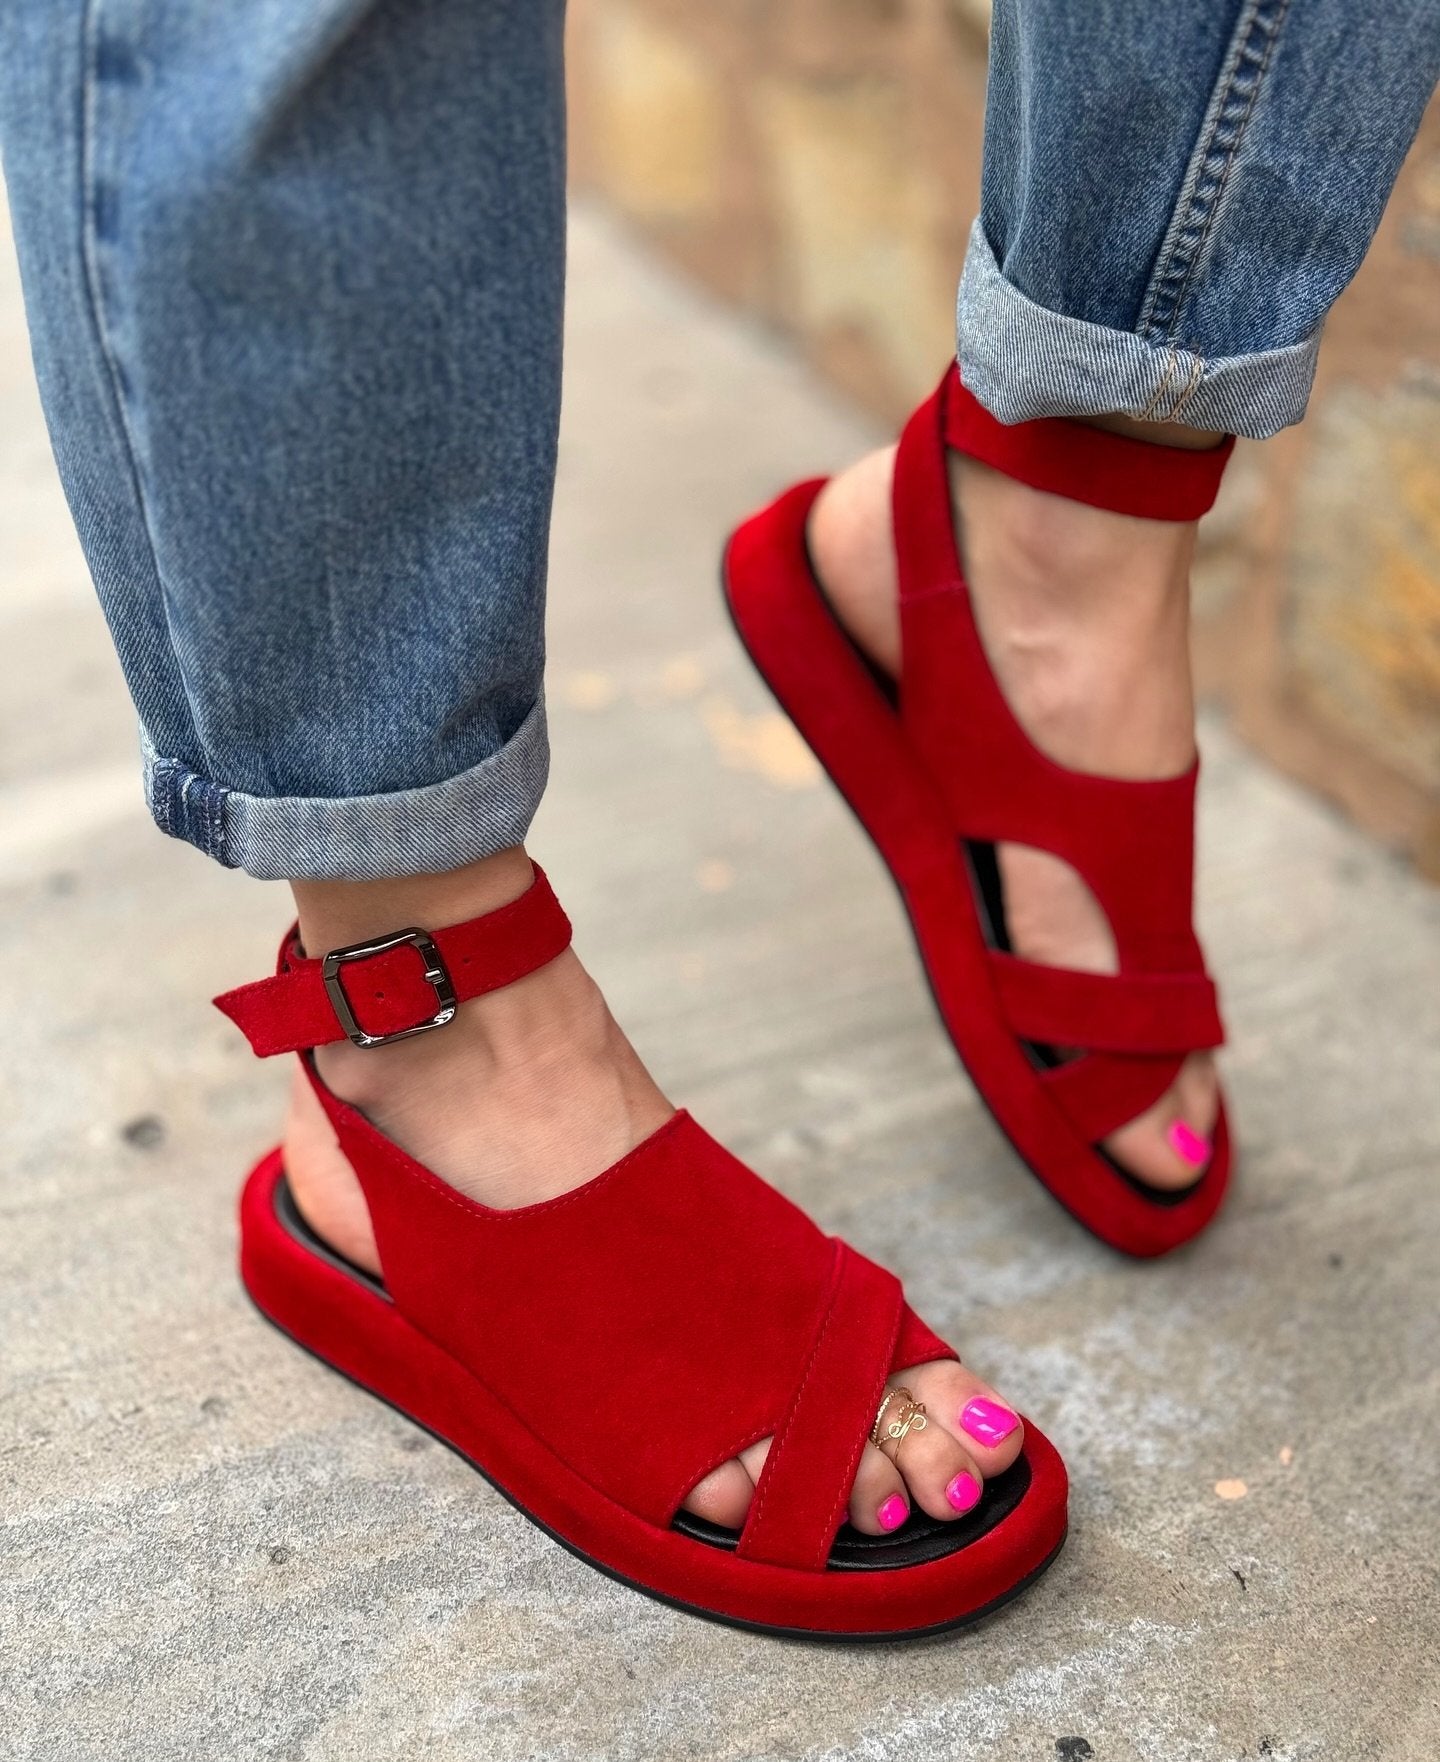 The Chic Colorful Flat Shoes